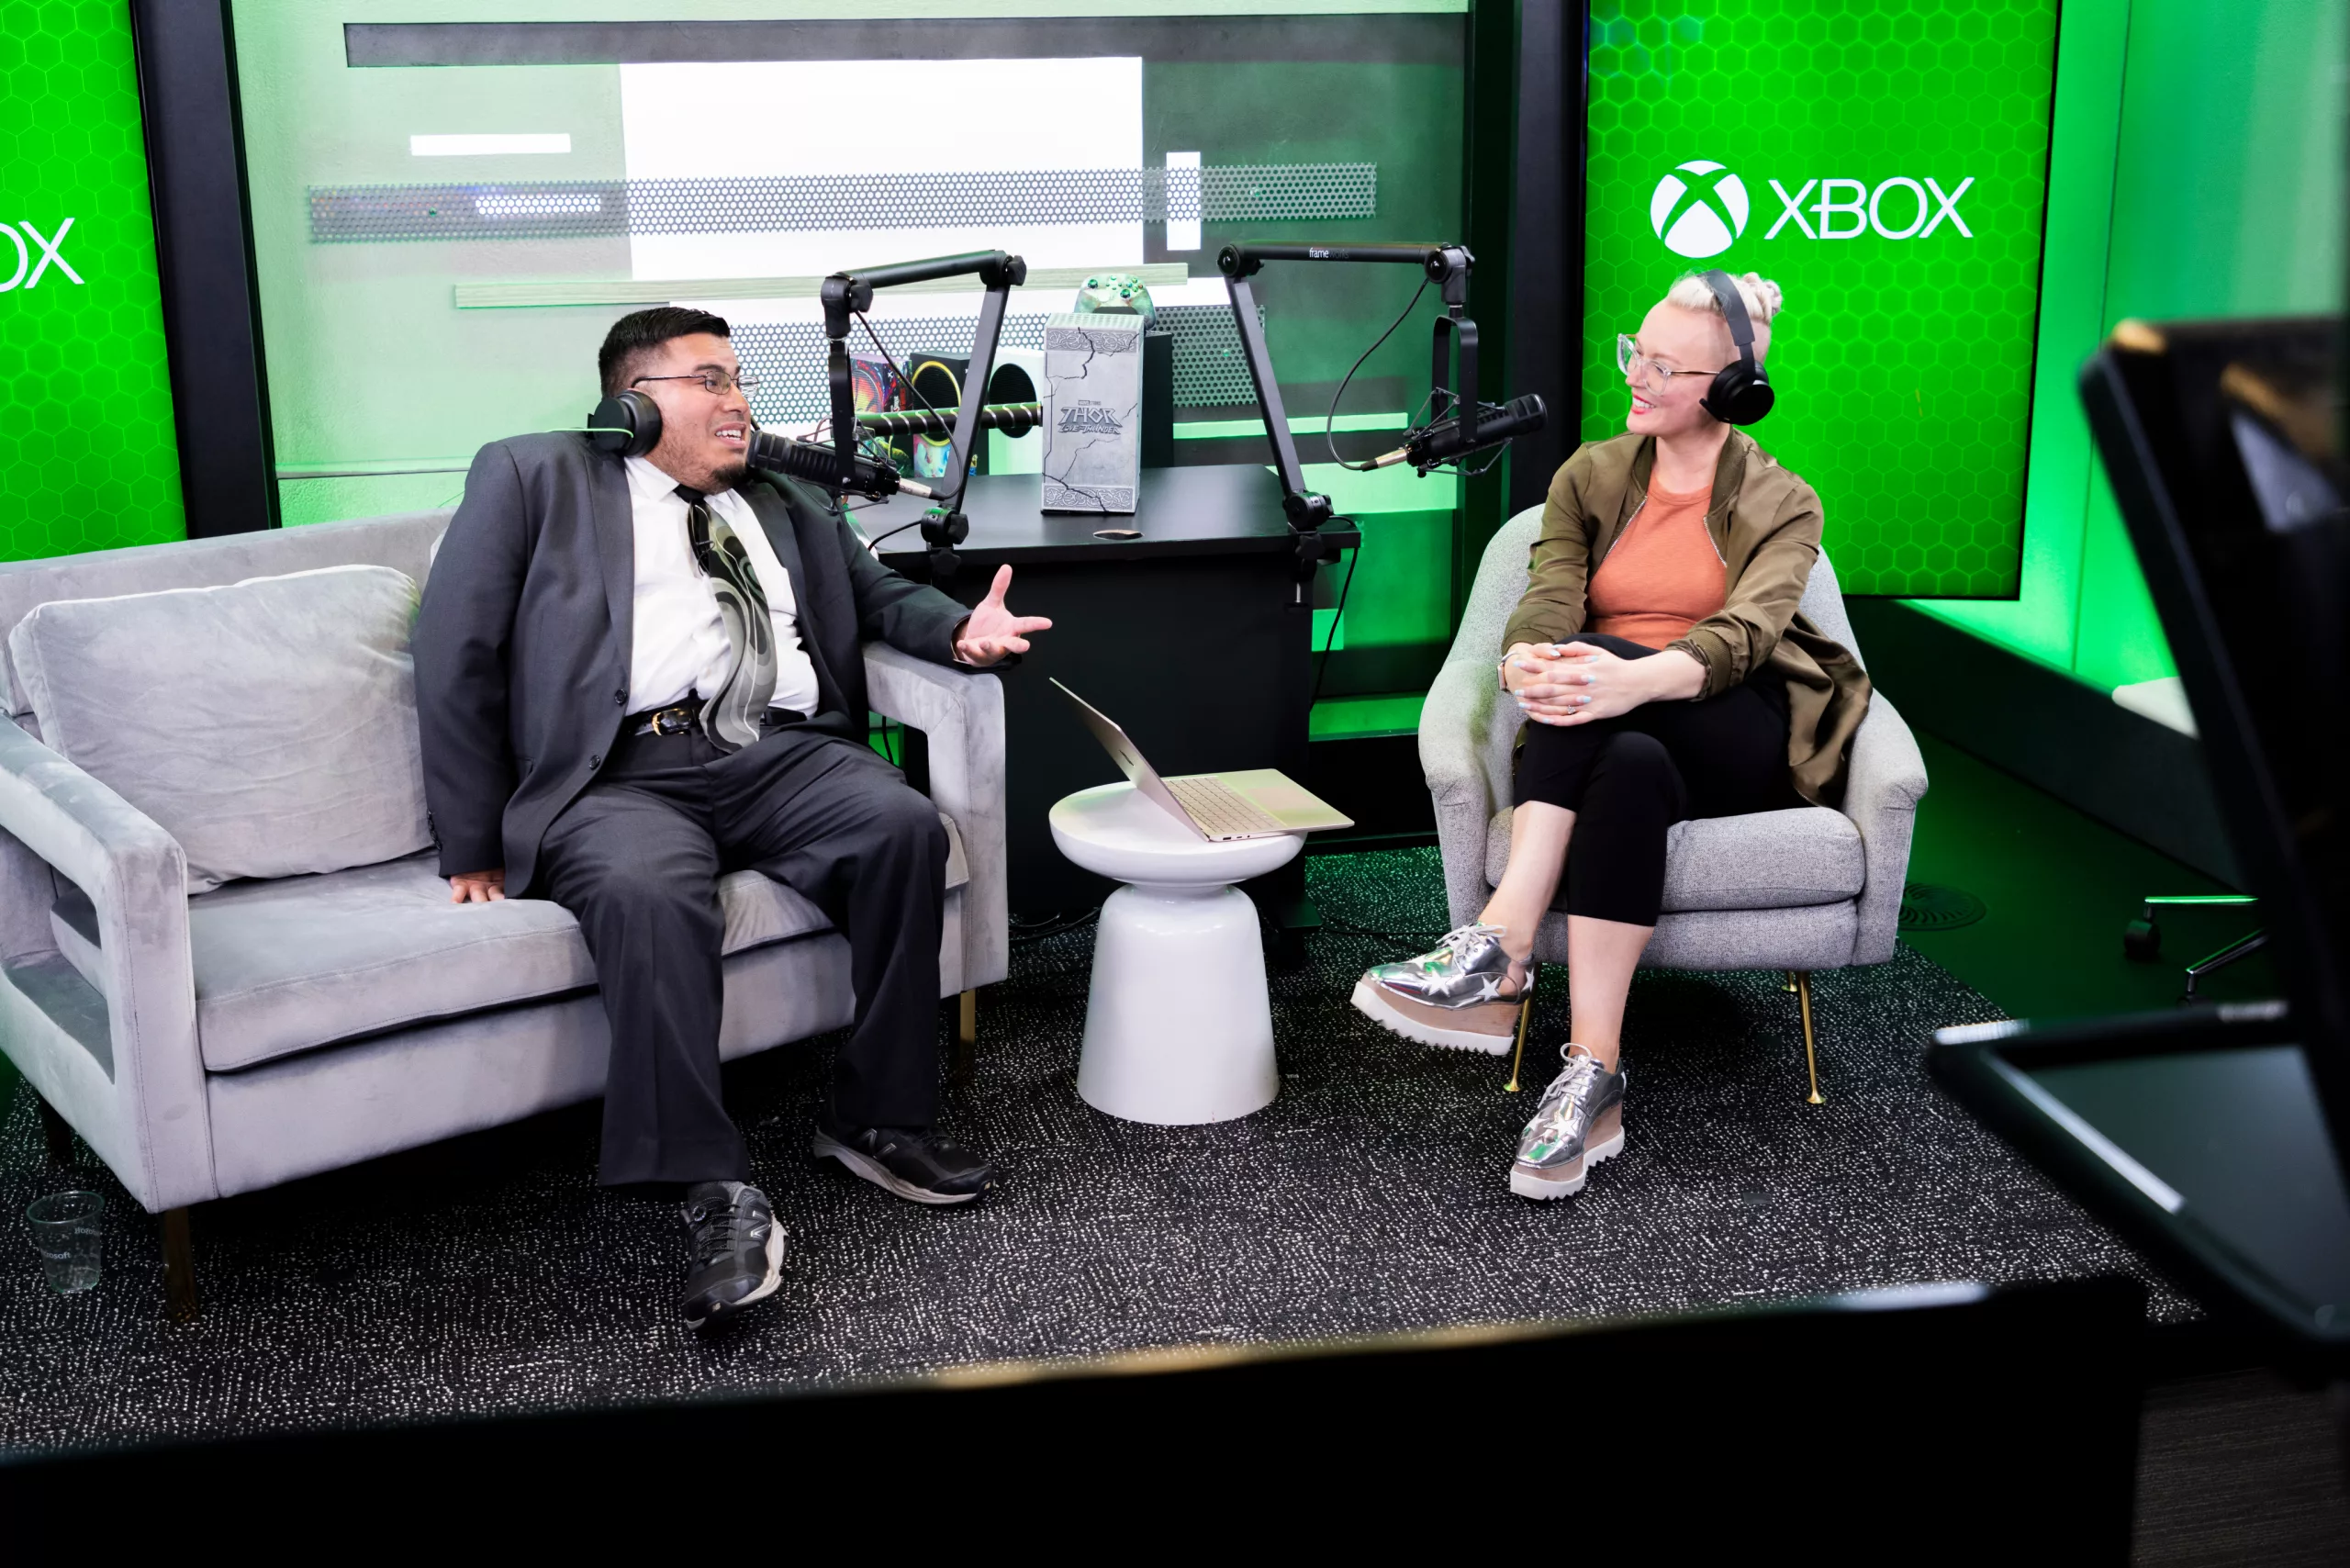 Two people sit wearing headphones. A man in a suit and tie sits on a couch on the left and a woman in an orange and brown top sits on the right. They have microphones in front of them. There are XBOX signs with XBOX logos behind them on a green wall.